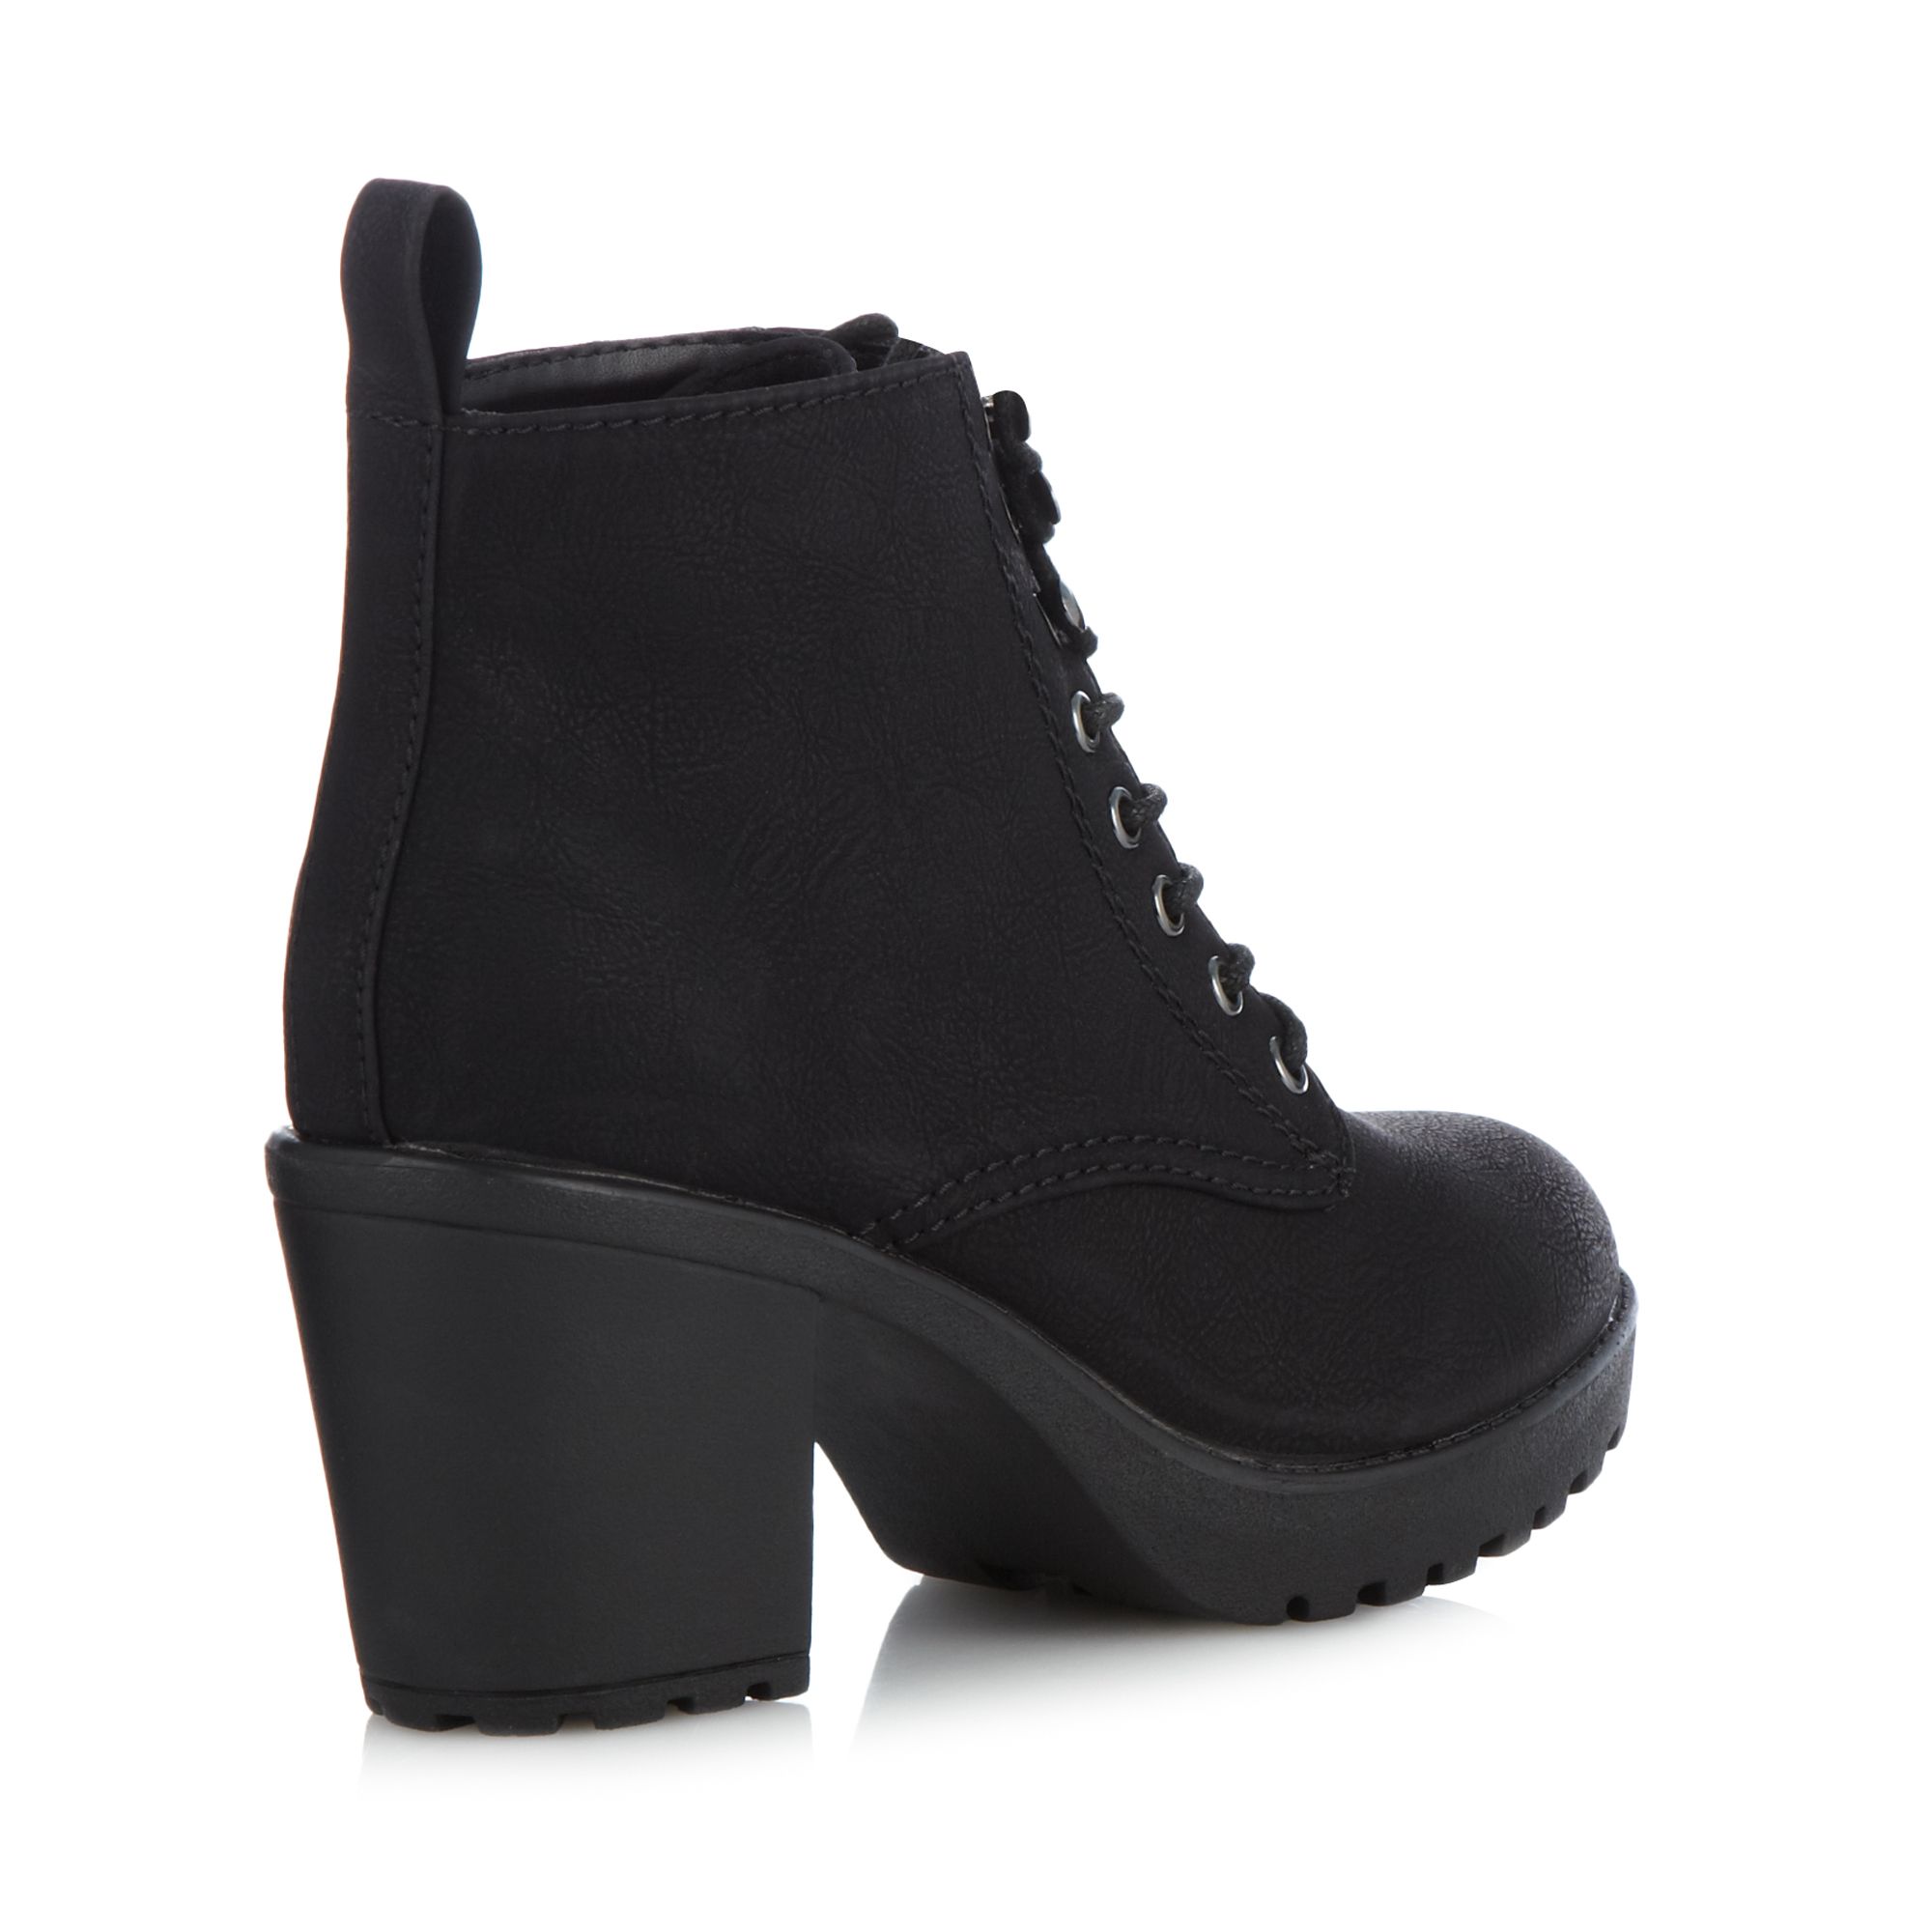 Call It Spring Womens Black 'Hiesen' High Ankle Boots From Debenhams | eBay